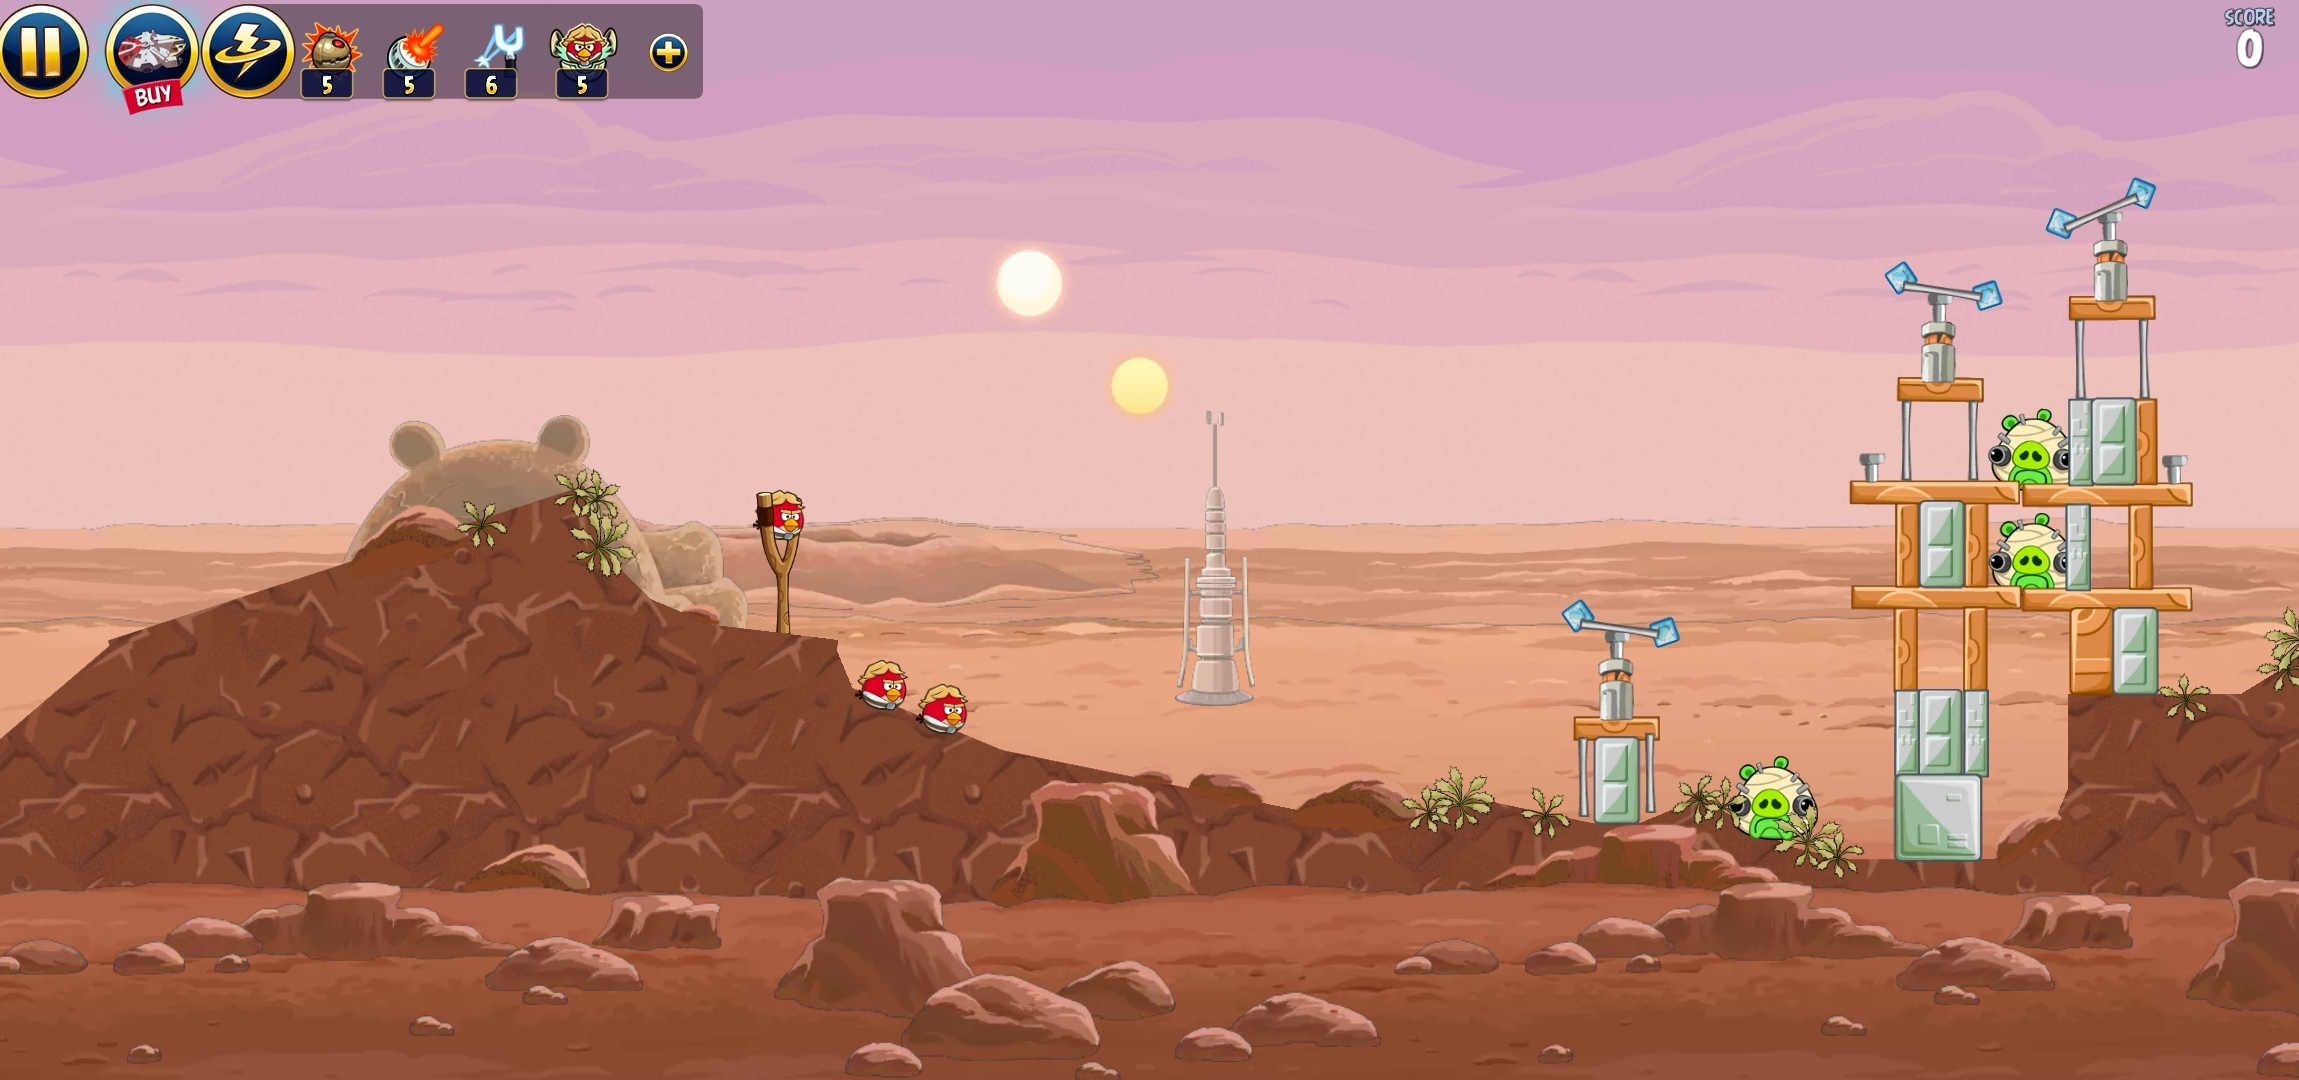 Angry Birds Star Wars